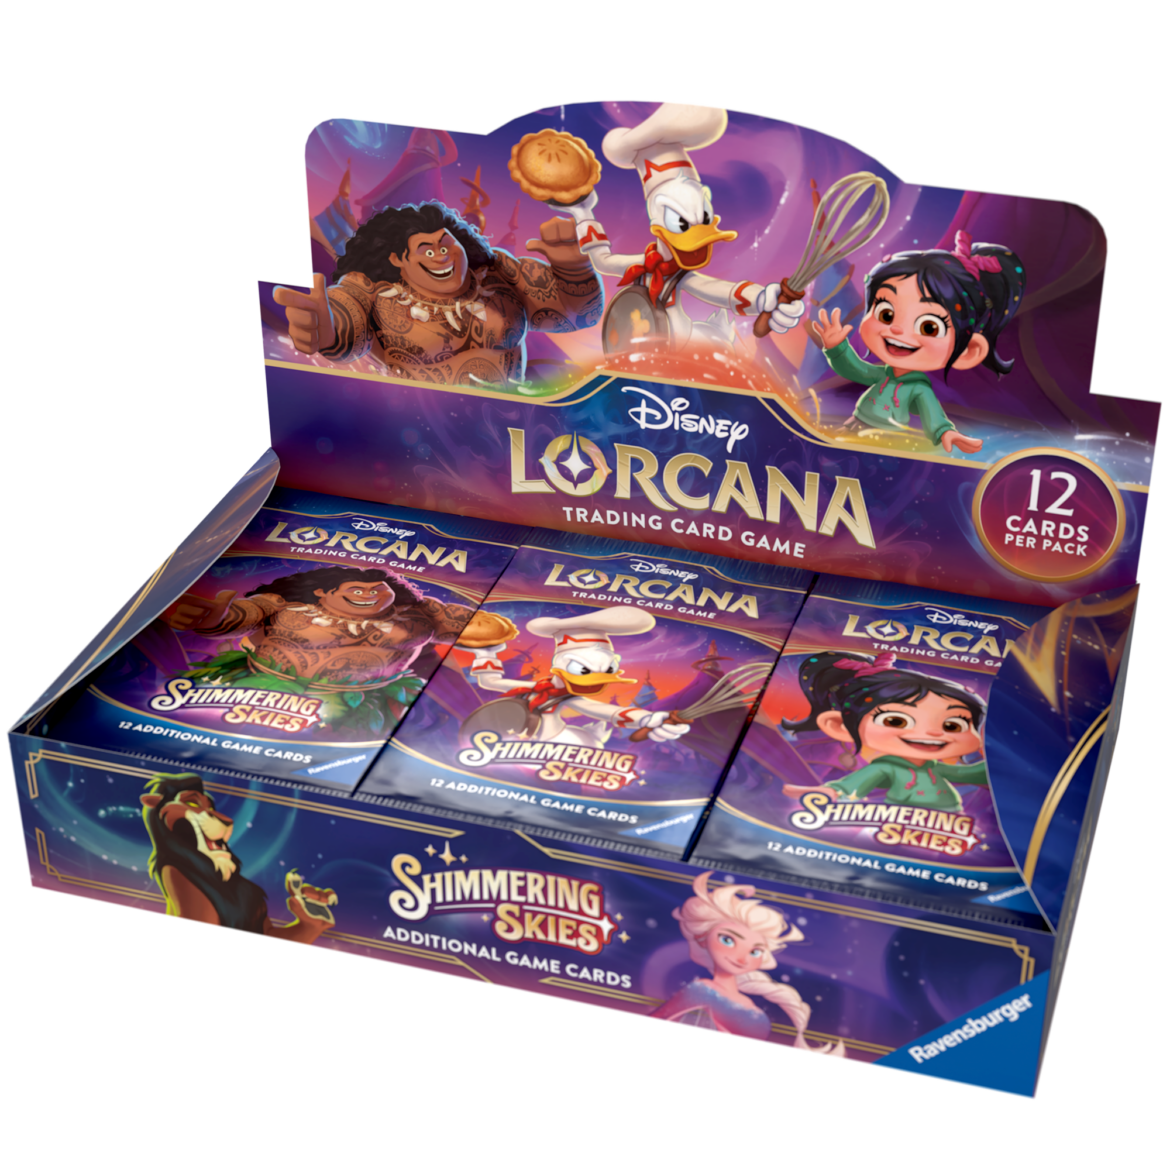 Shimmering Skies Announced as 5th Expansion Set to Lorcana